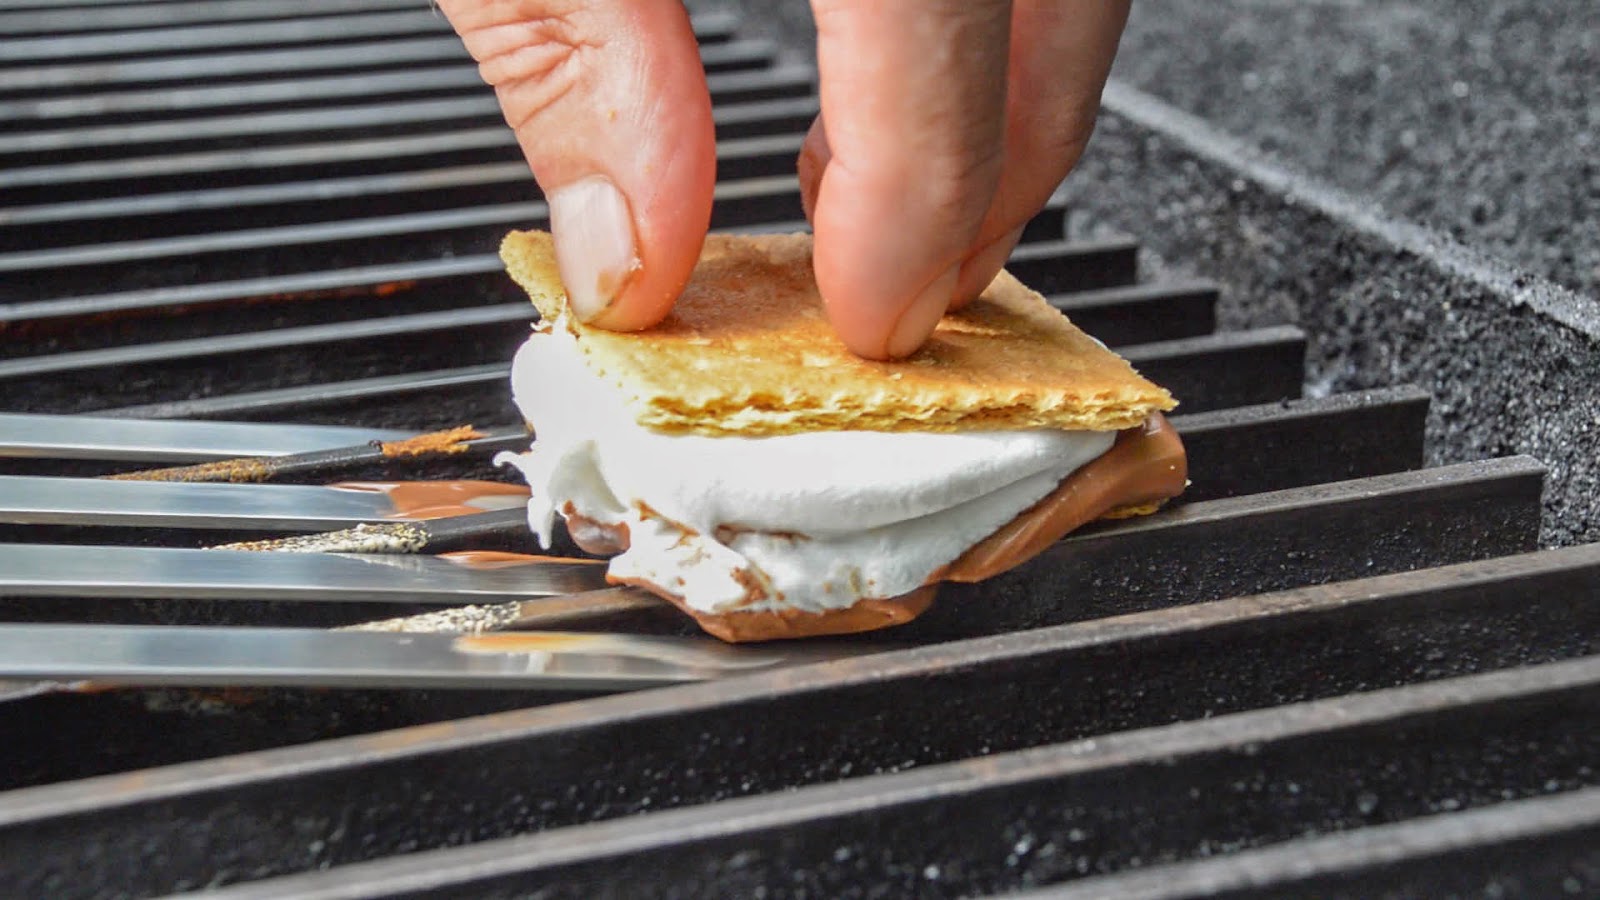 Grillling S'mores